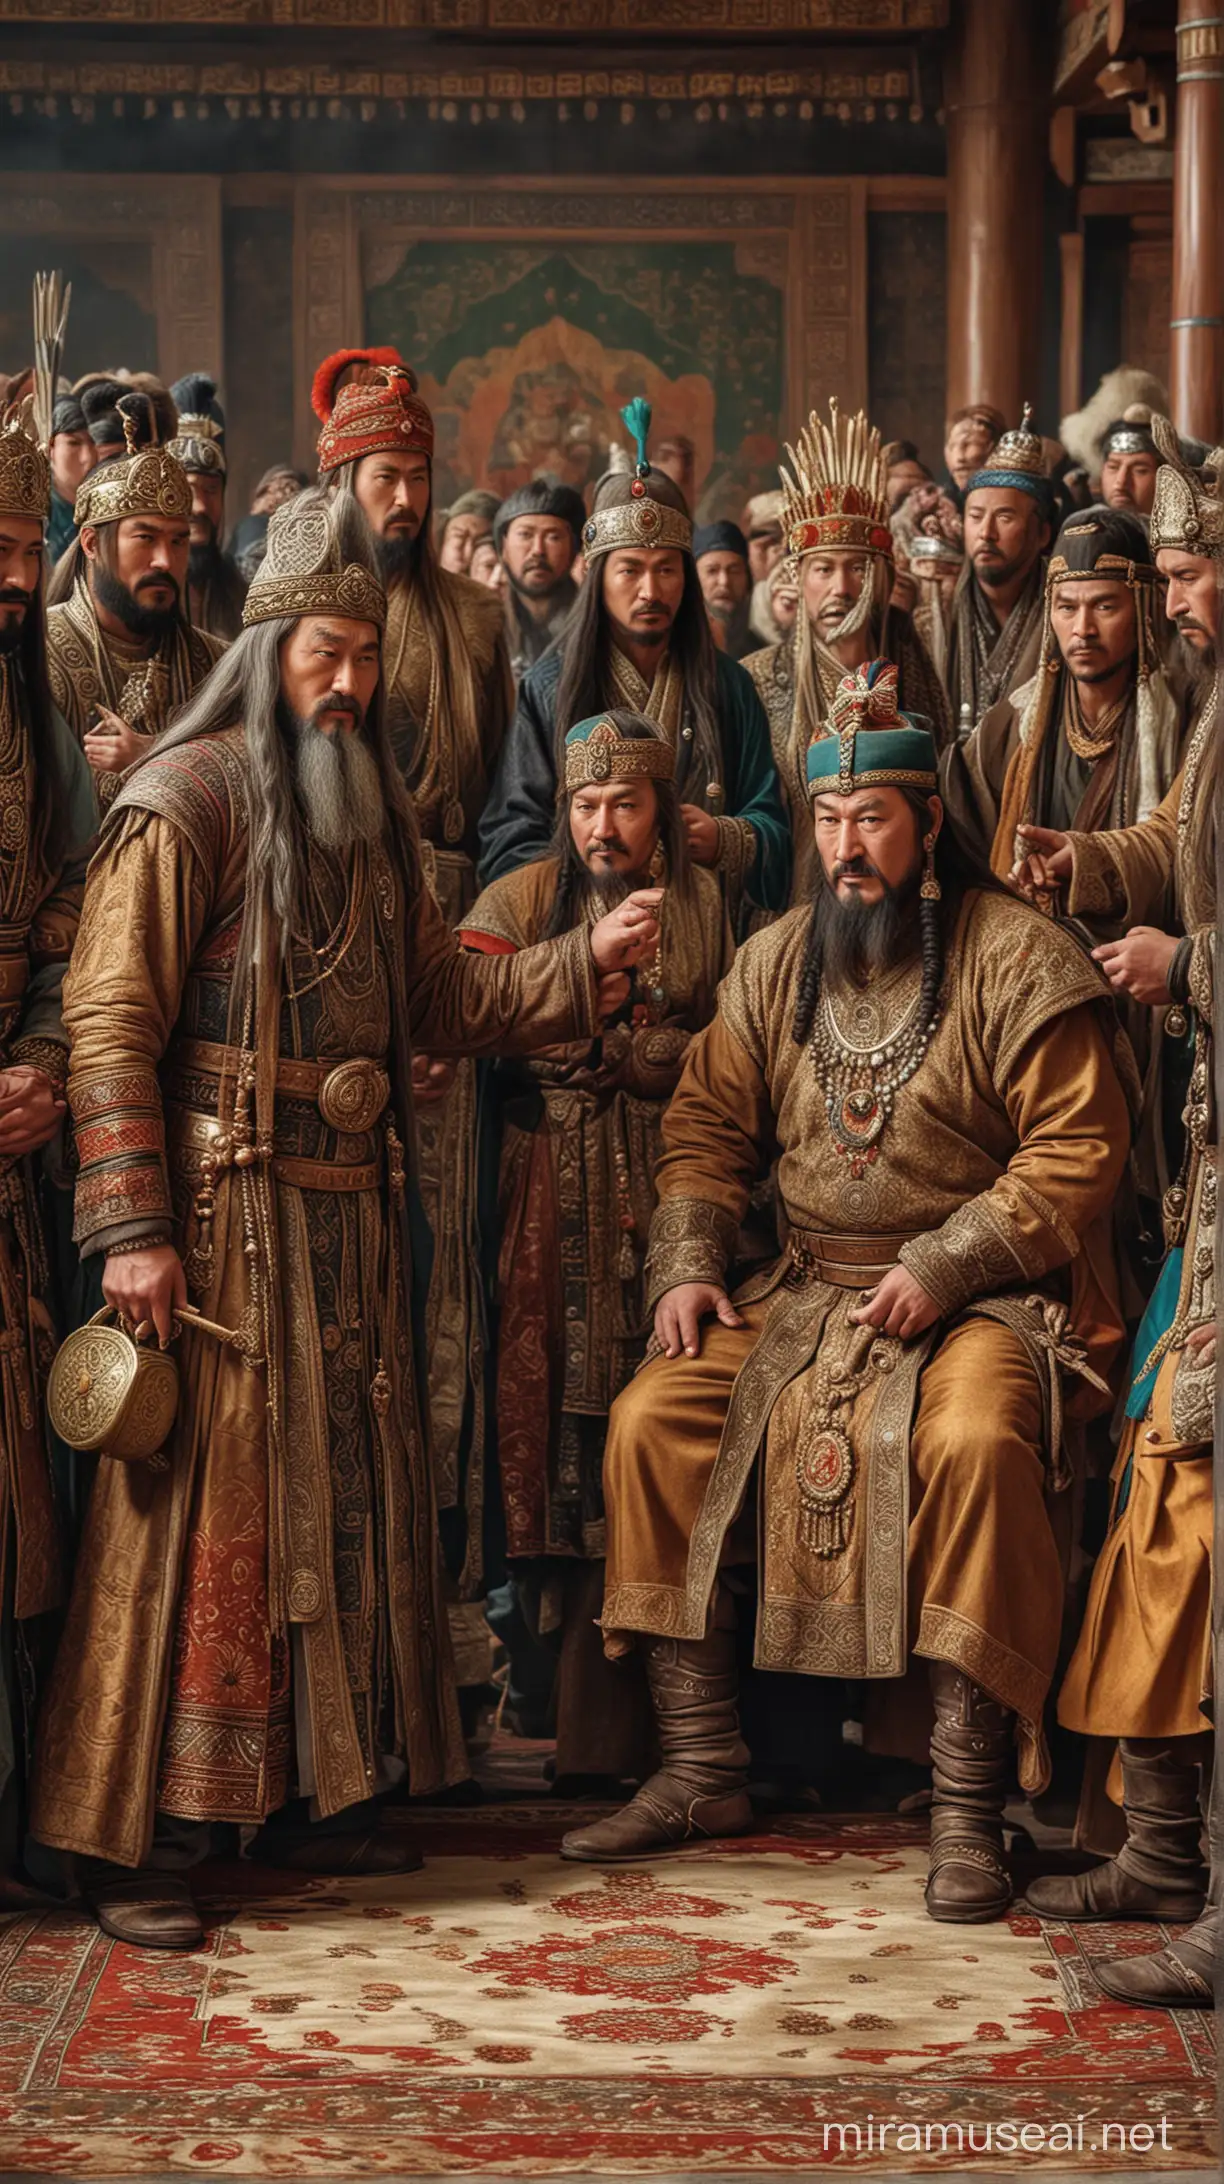 Photo of Genghis Khan negotiating marriage alliances with other rulers. hyper realistic